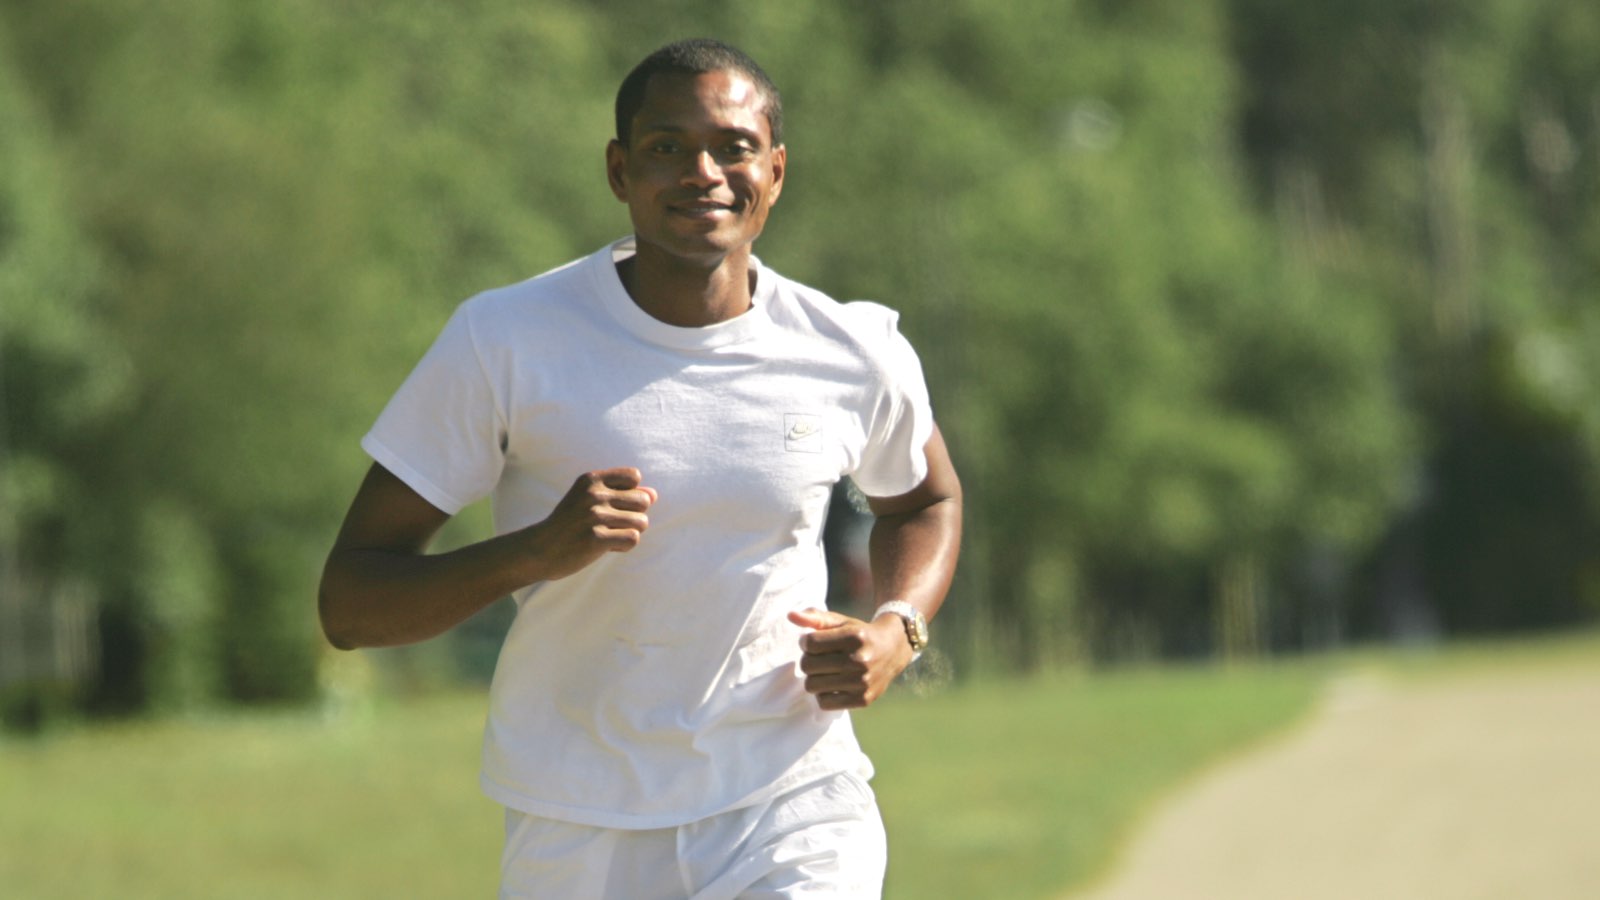 A man smiles while running in white t-shirt and shorts on a path outside near a forest.